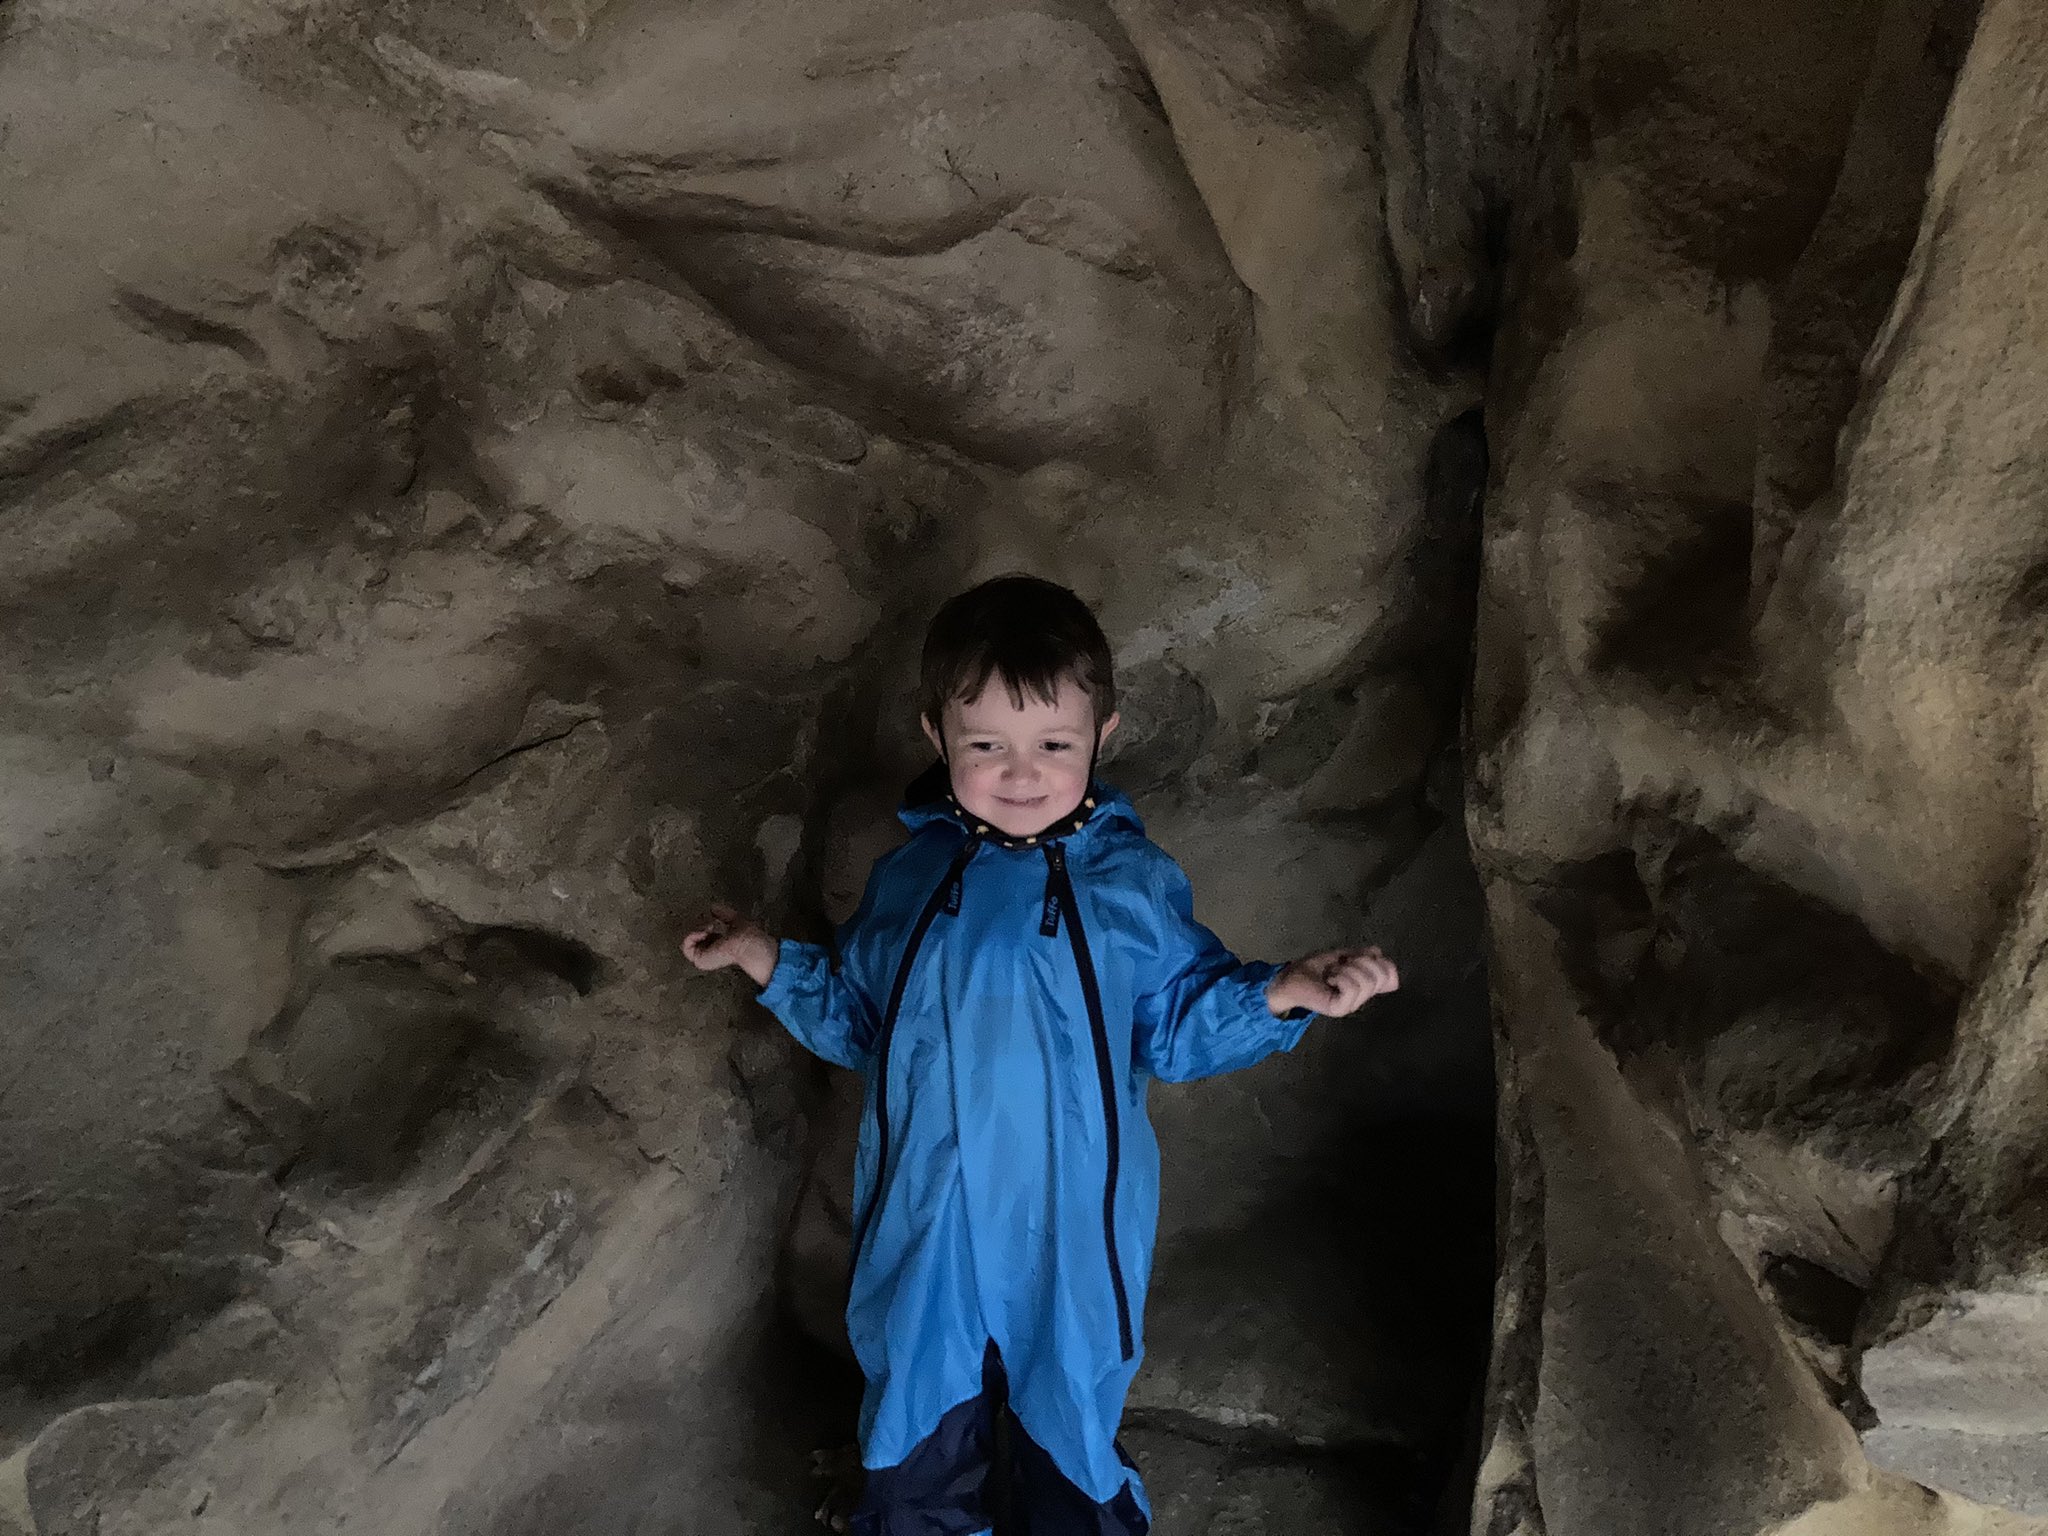 Julian in a cave-like rock formation. The rocks are very pitted. Julian is in a blue rain gear and is holding his hands out on either side, pussibly to catch drips.